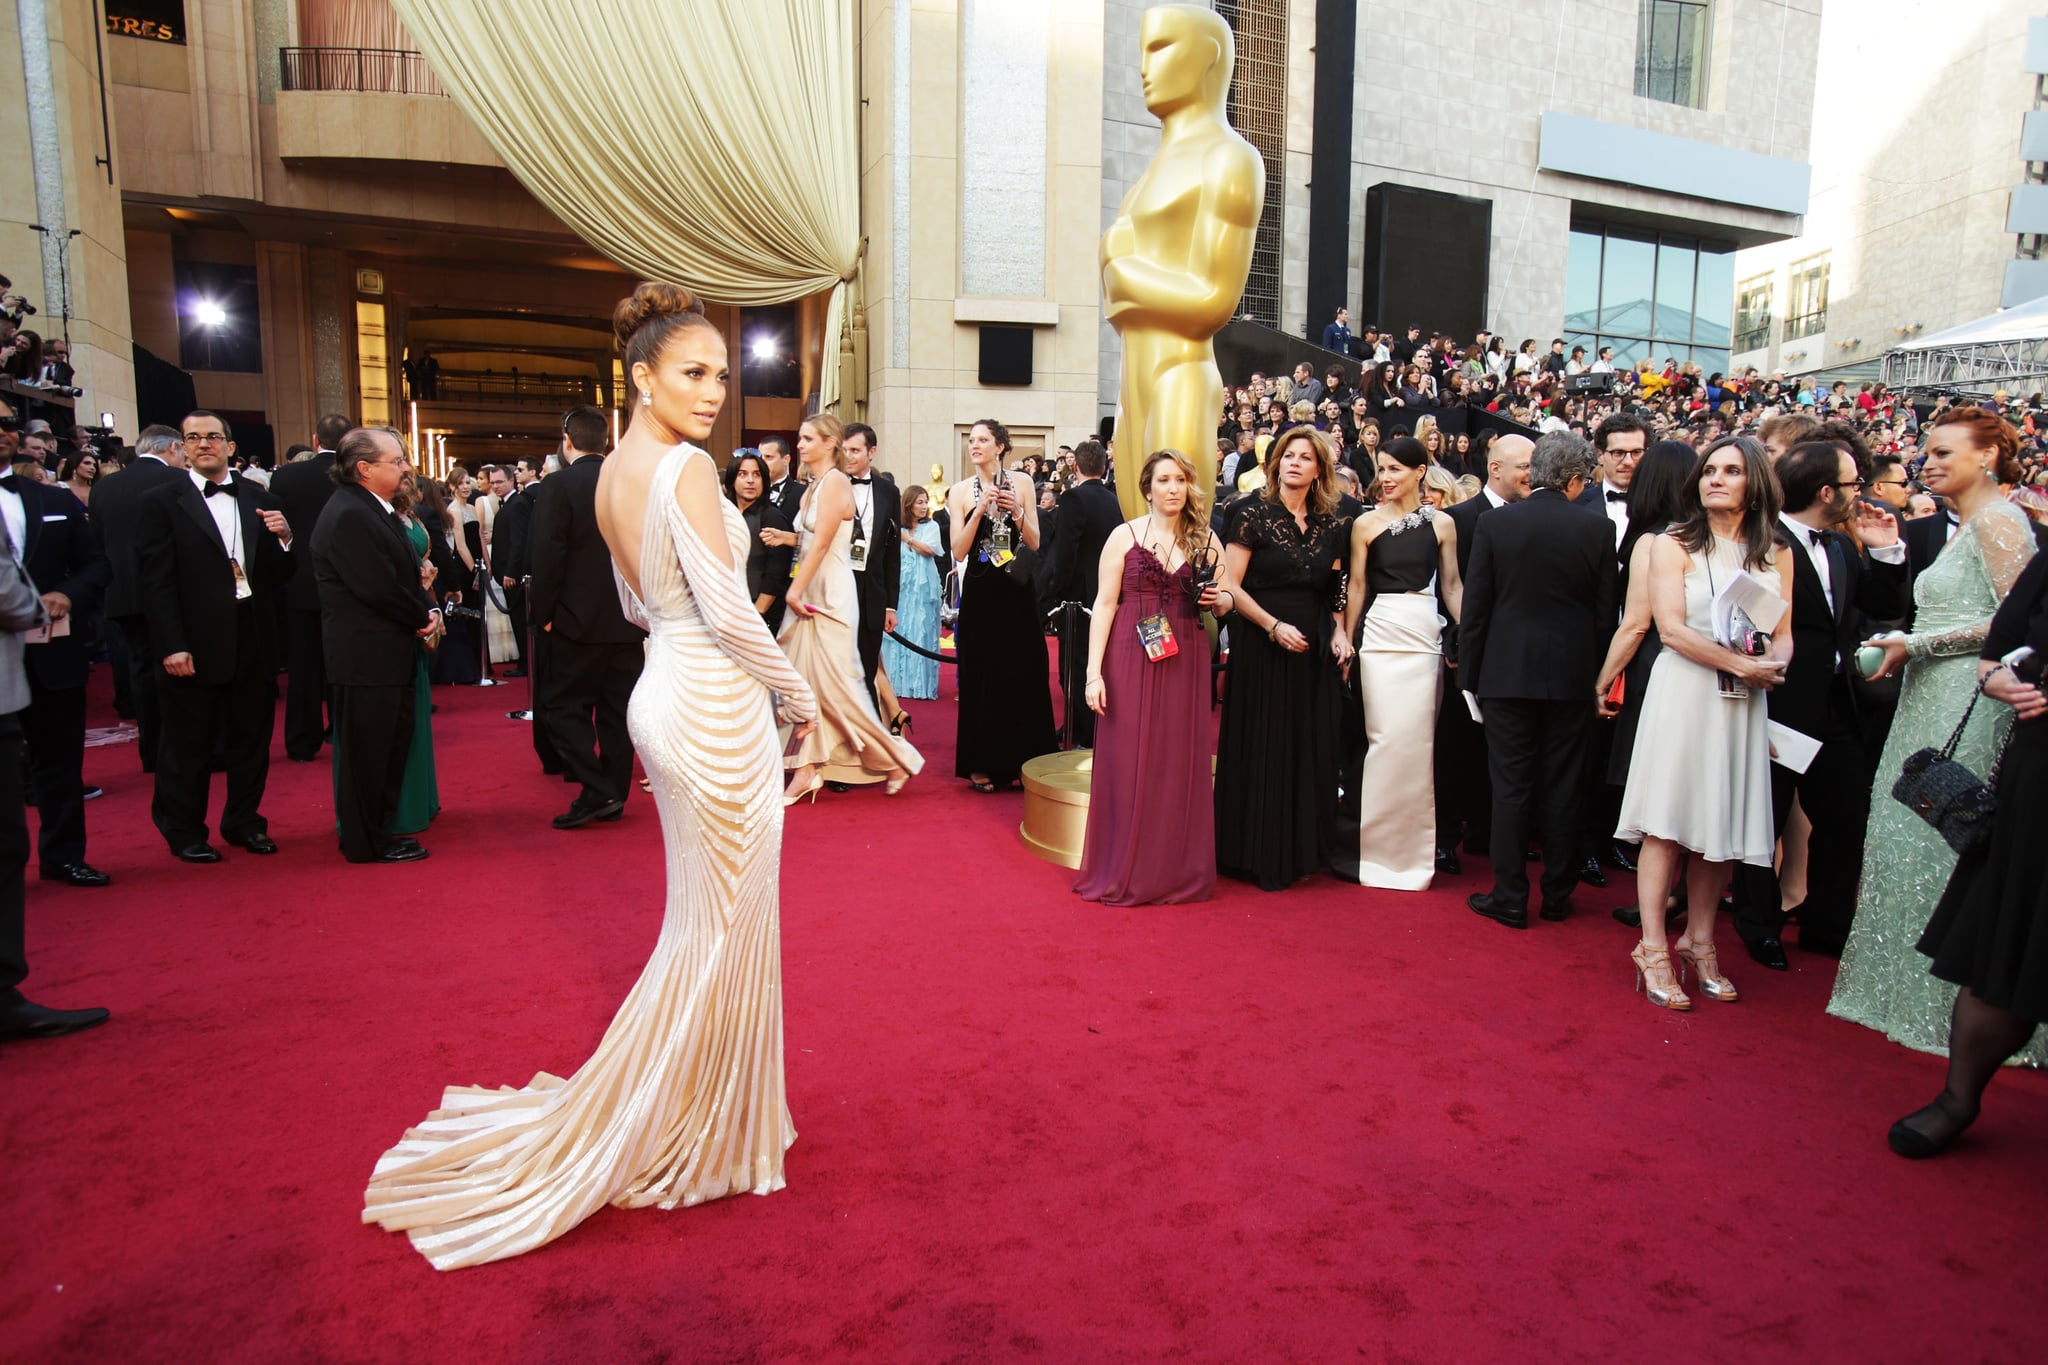 HOLLYWOOD, CA - FEBRUARY 26: actress Jennifer Lopez arrives at the 84th Annual Academy Awards held at the Hollywood & Highland Centre on February 26, 2012 in Hollywood, California.  (Photo by Jeff Vespa/WireImage)